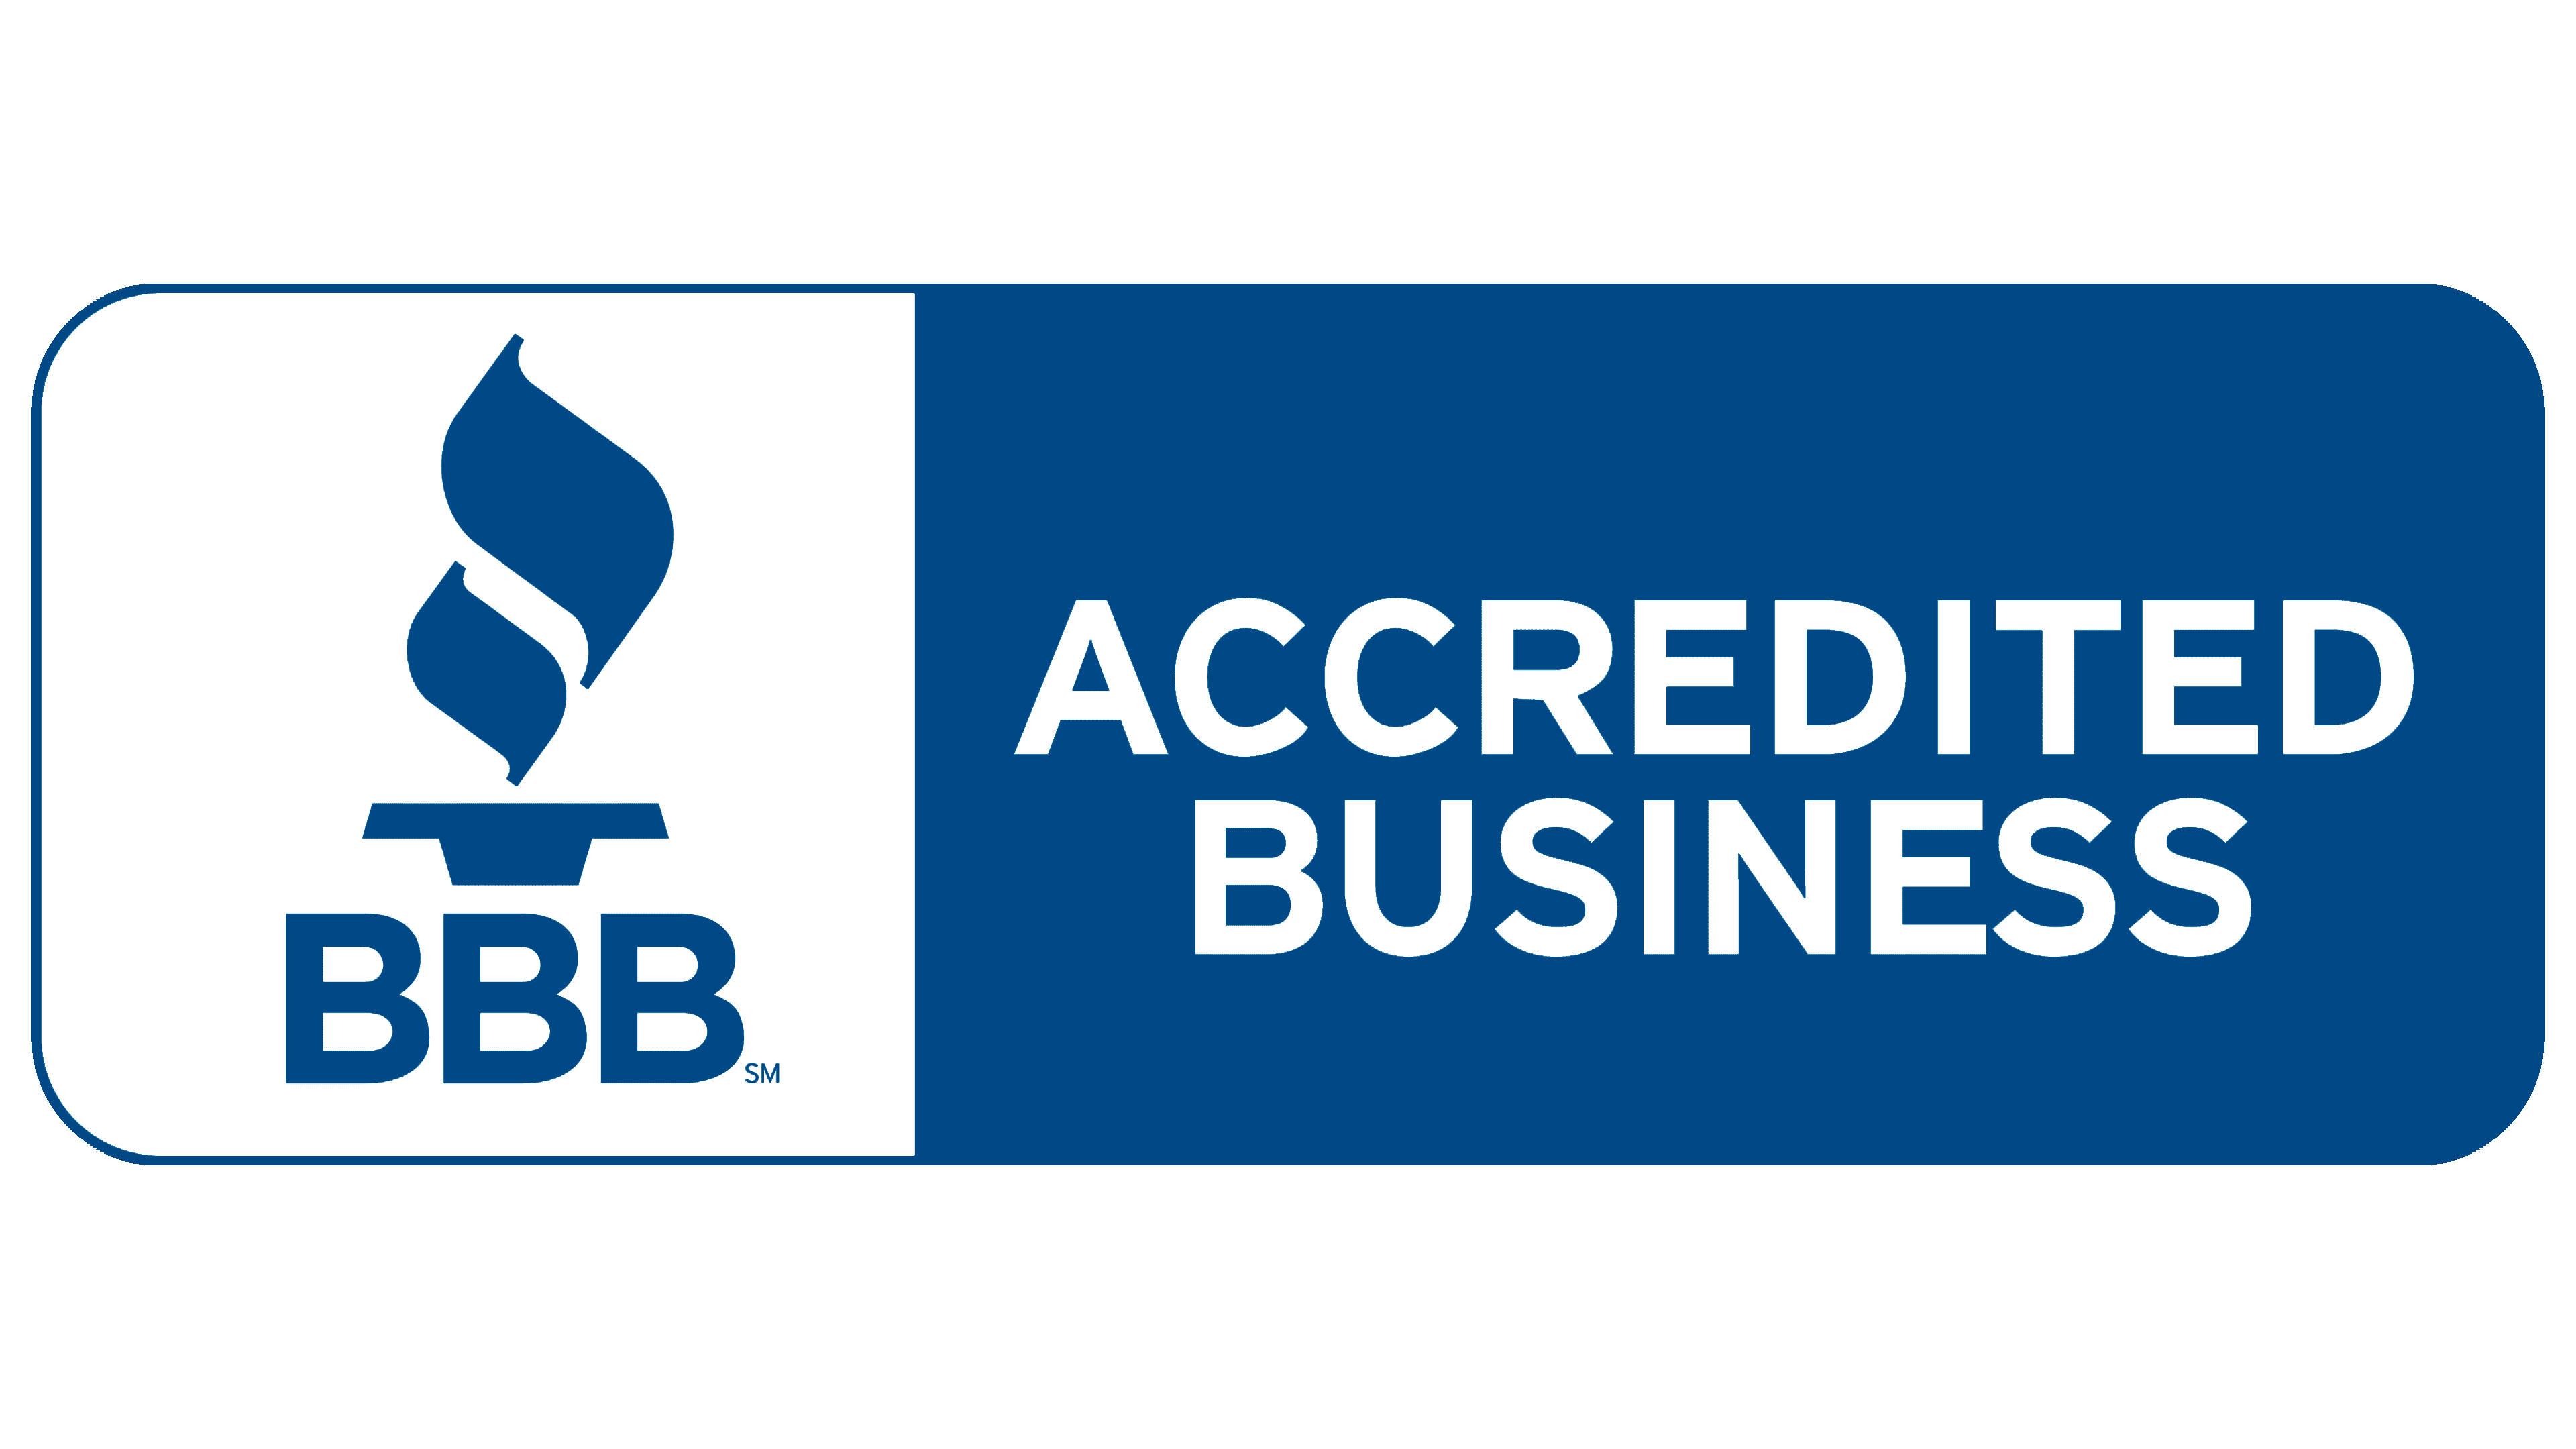 A bbb accredited business logo